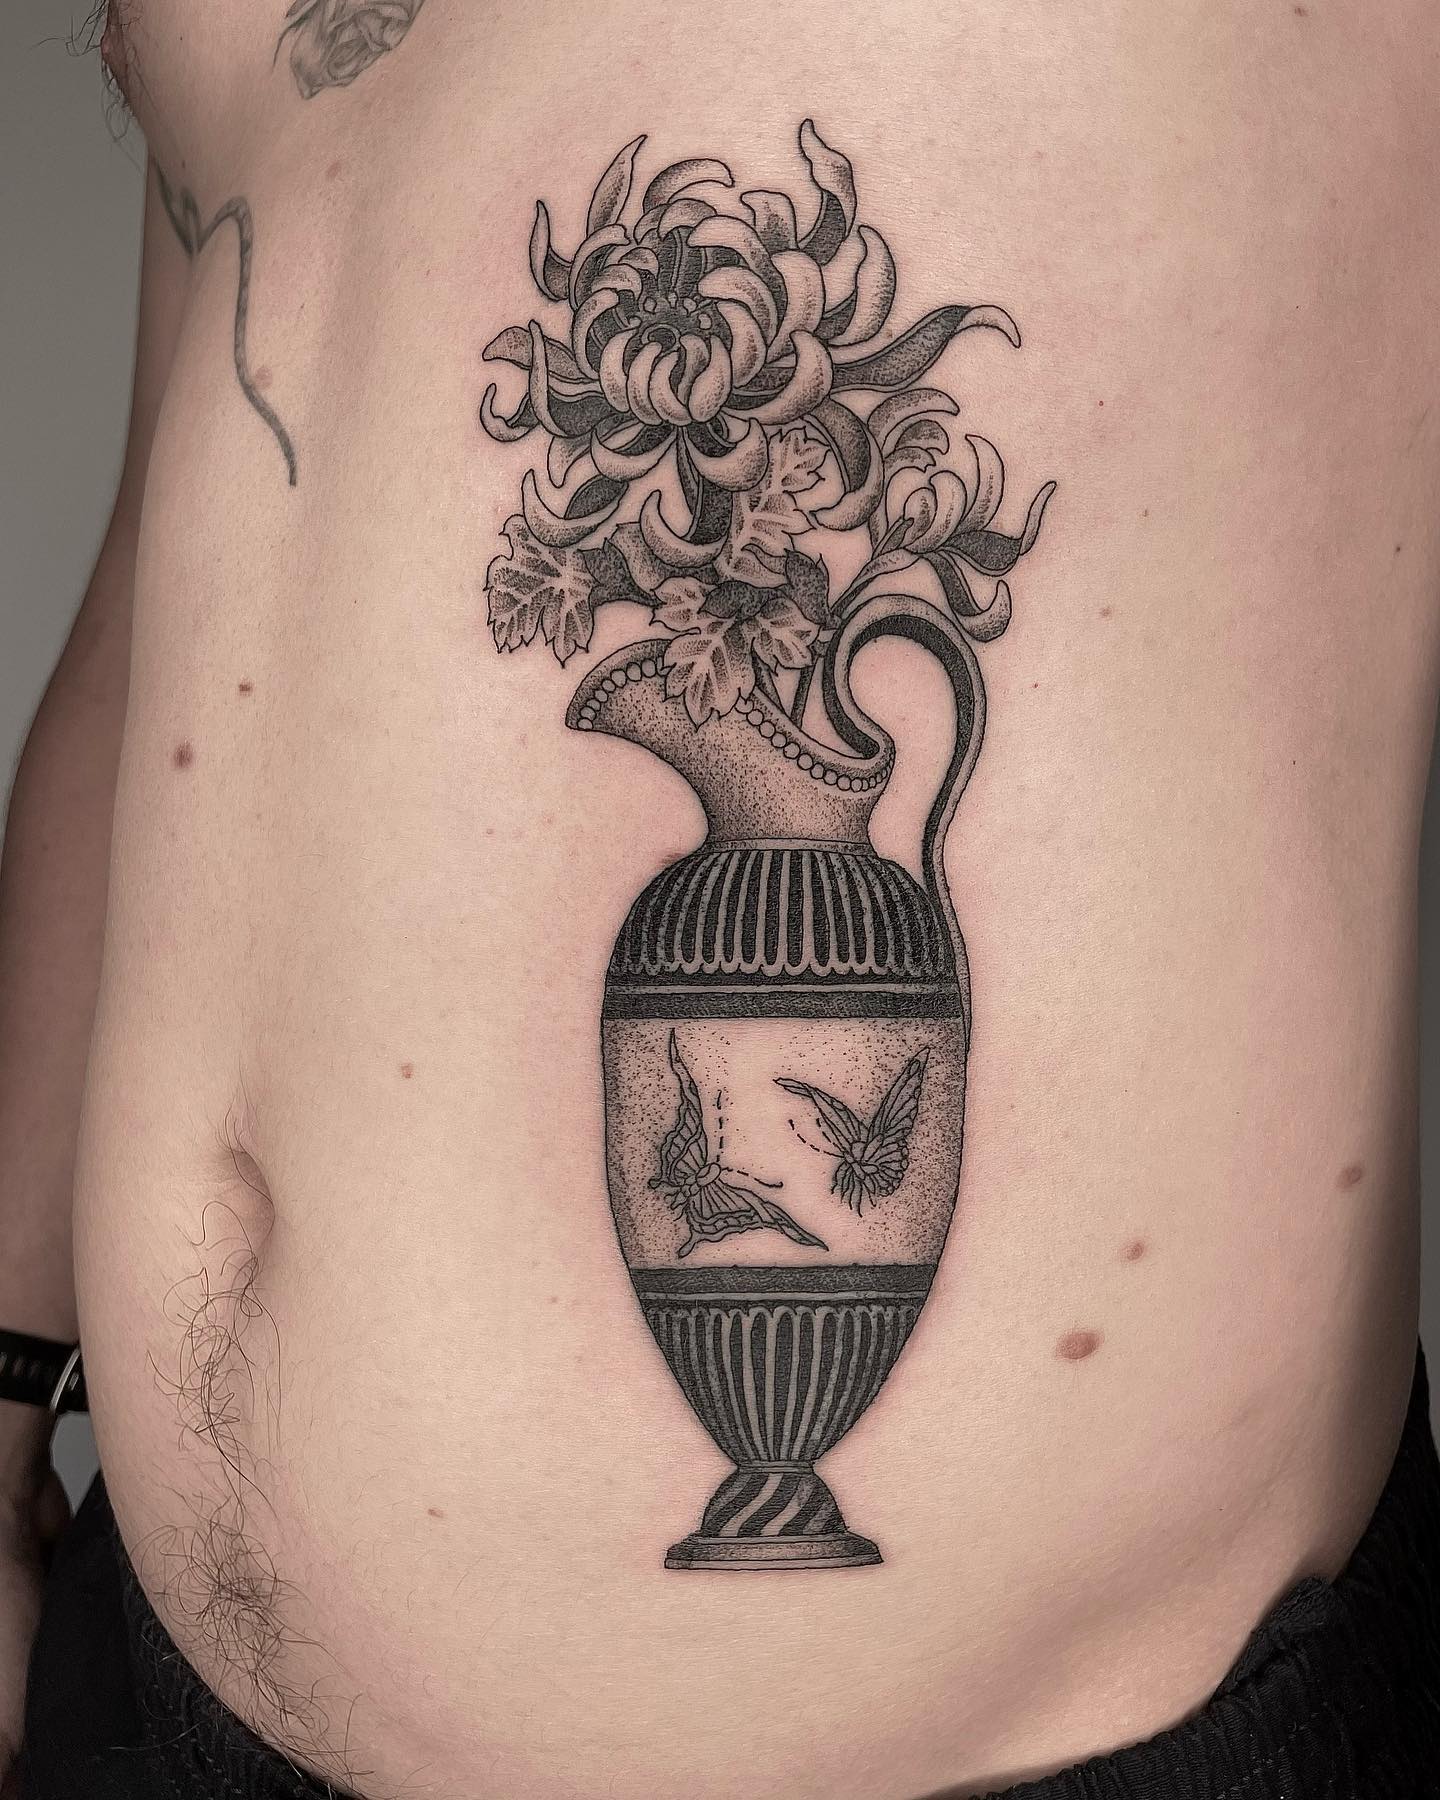 This shady-looking vase tattoo looks stunning with its details. Plus, butterflies have a positive meaning of rebirth, joy and beauty.